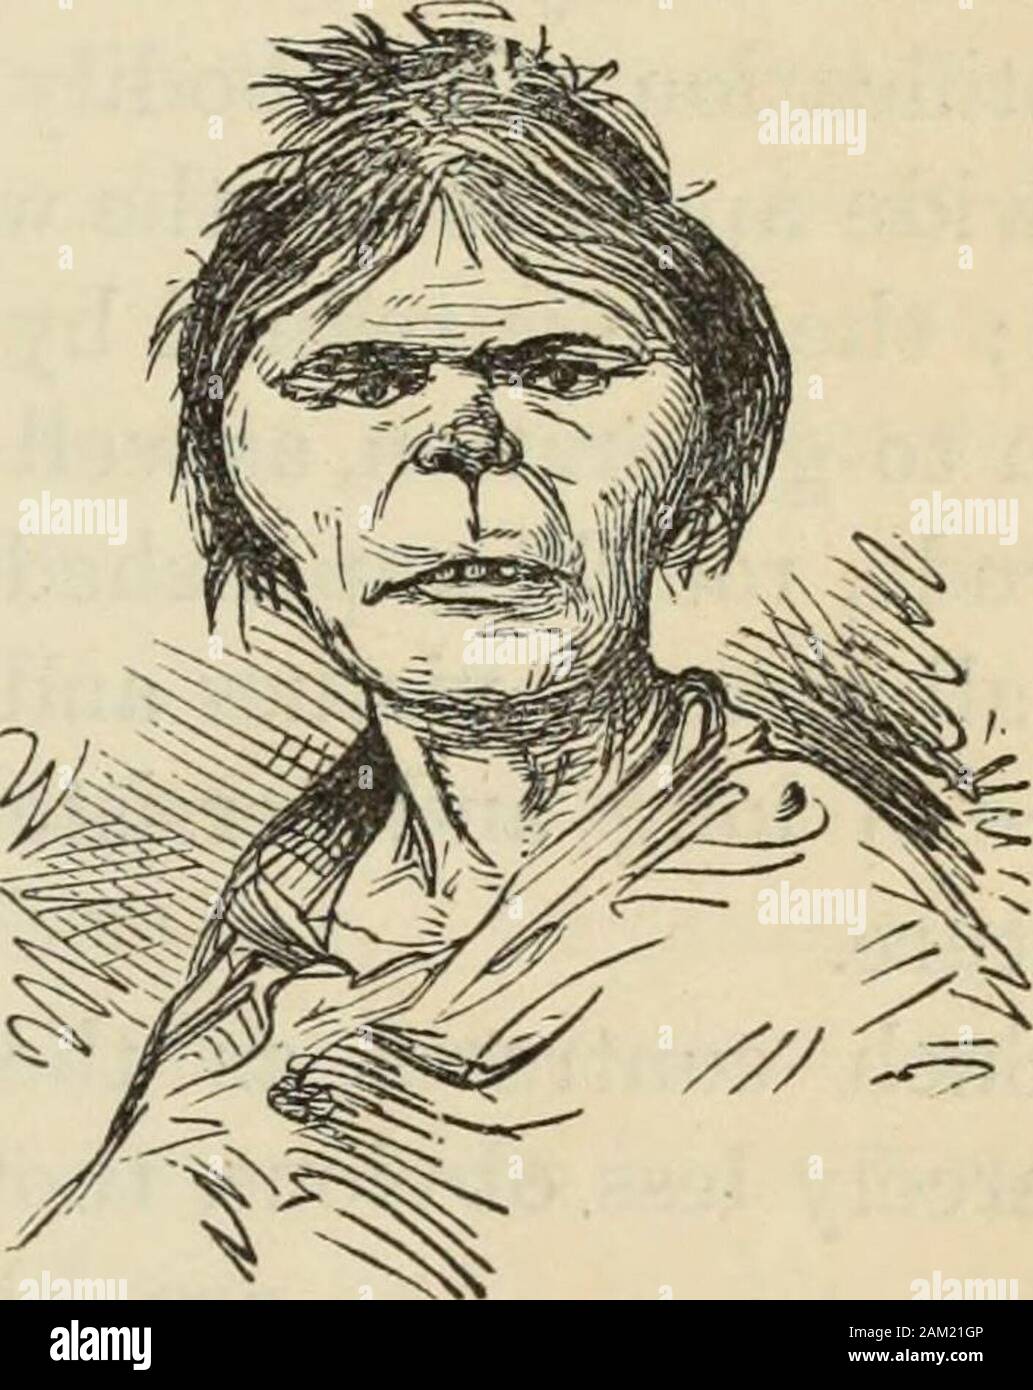 New Physiognomy : or signs of character, as manifested through temperament and external forms, and especially in the 'the human face divine.' . Fig. 747. - Florence NIGHTl^GALE. Fig. 748.—Bridget McBruiser. would, no doubt, have love for her husband. The points forthe physiologist, phrenologist, and physiogn(5mist to decideare the natural disposition of each, and wherein they differ.He observes the temperaments; the forms of body; learnswhat parts of body and brain predominate; judges of thedegree of culture each has received; compares the quality ofone with that of tlie other, and draws the l Stock Photo